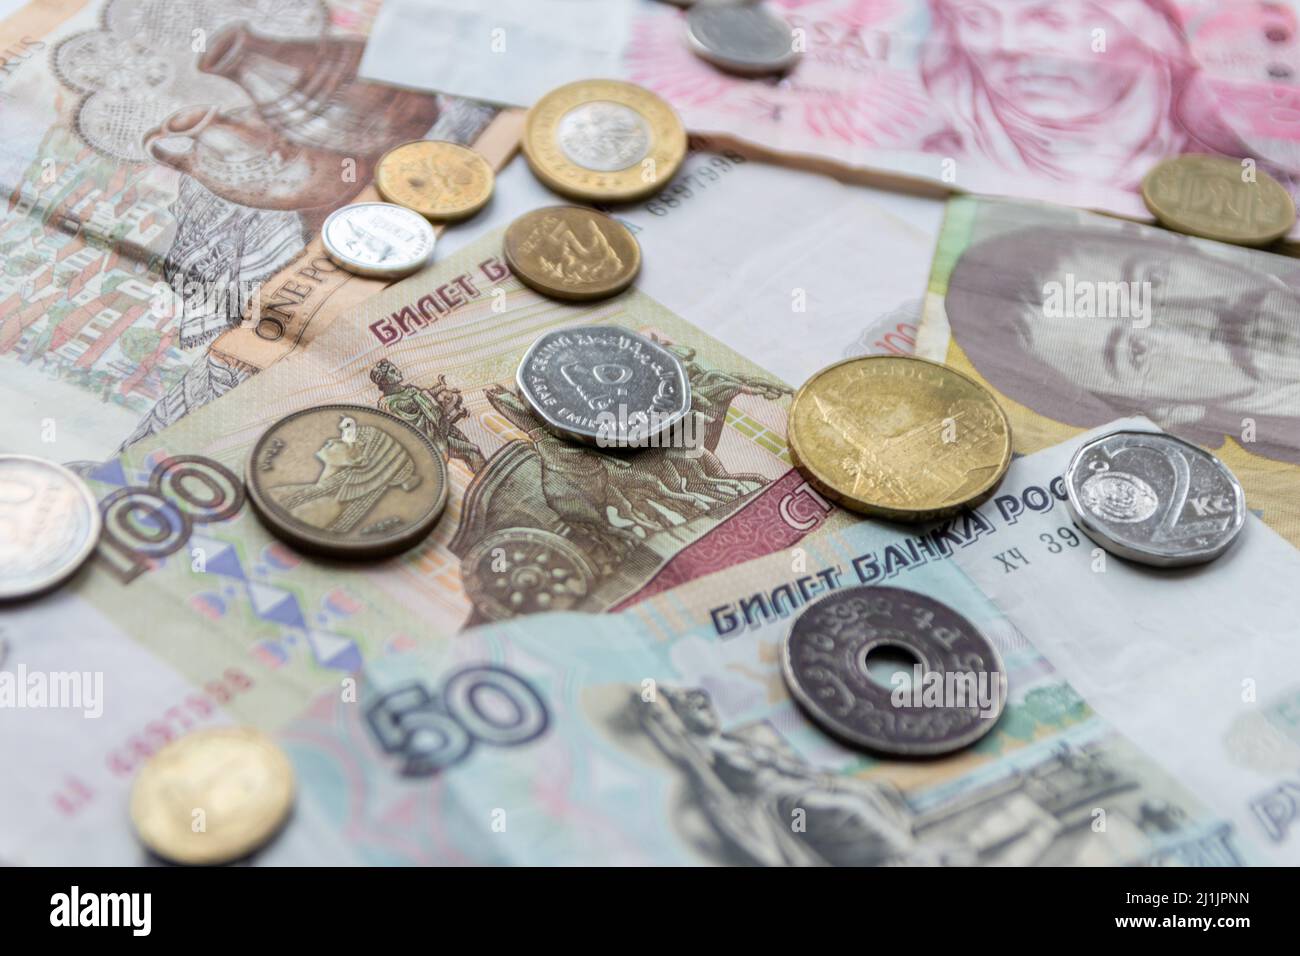 Variety of different bank notes and coins from various countries like euro, pound, emirates money, cyprus bank note and others represent international Stock Photo